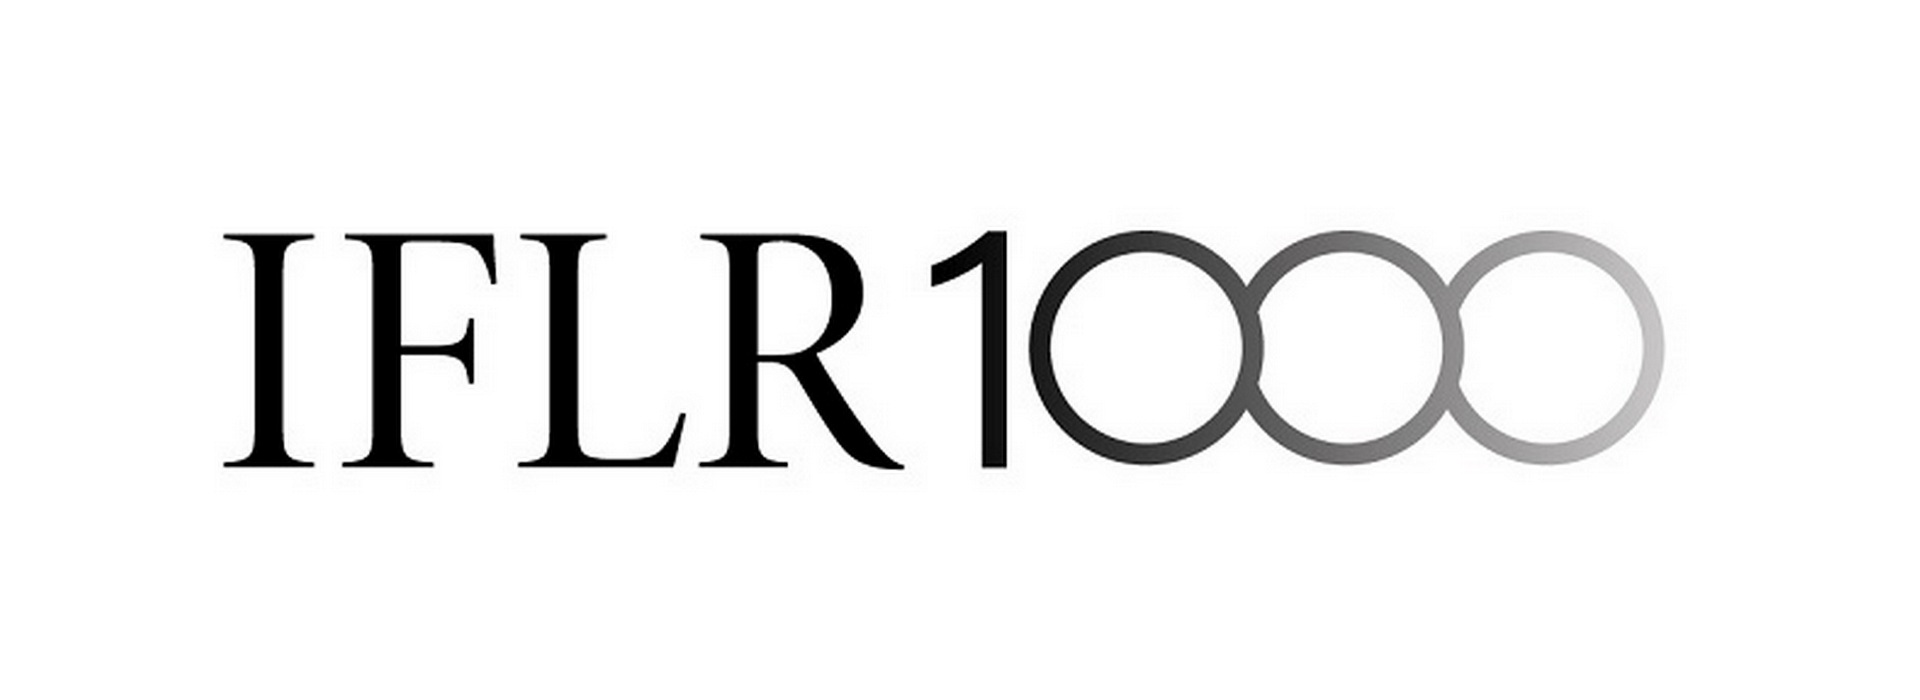 GOLAW Has Yet Again Been Recognized by Top Legal Guide IFLR1000 in Banking and Financial Law